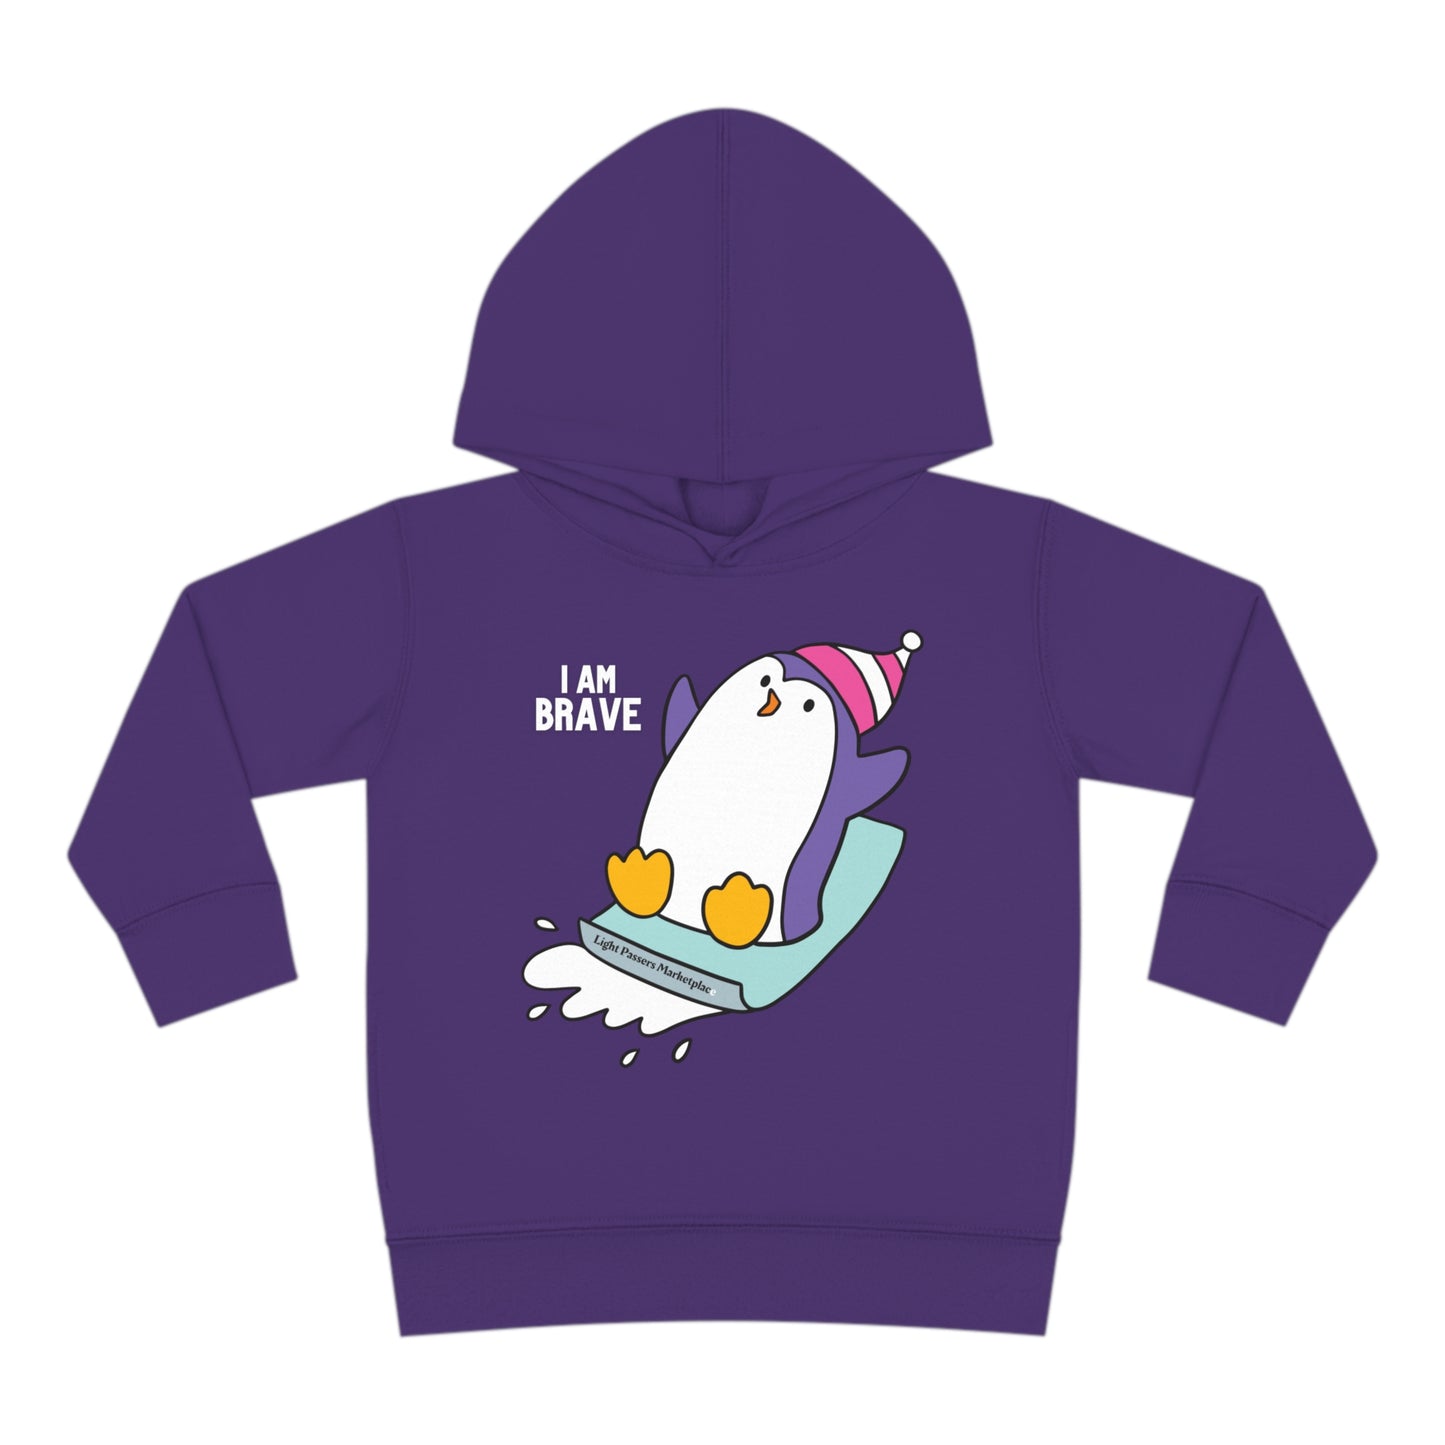 Toddler hoodie featuring a brave penguin design, jersey-lined hood, cover-stitched details, side-seam pockets, and durable construction. Made of 60% cotton, 40% polyester blend for lasting coziness.